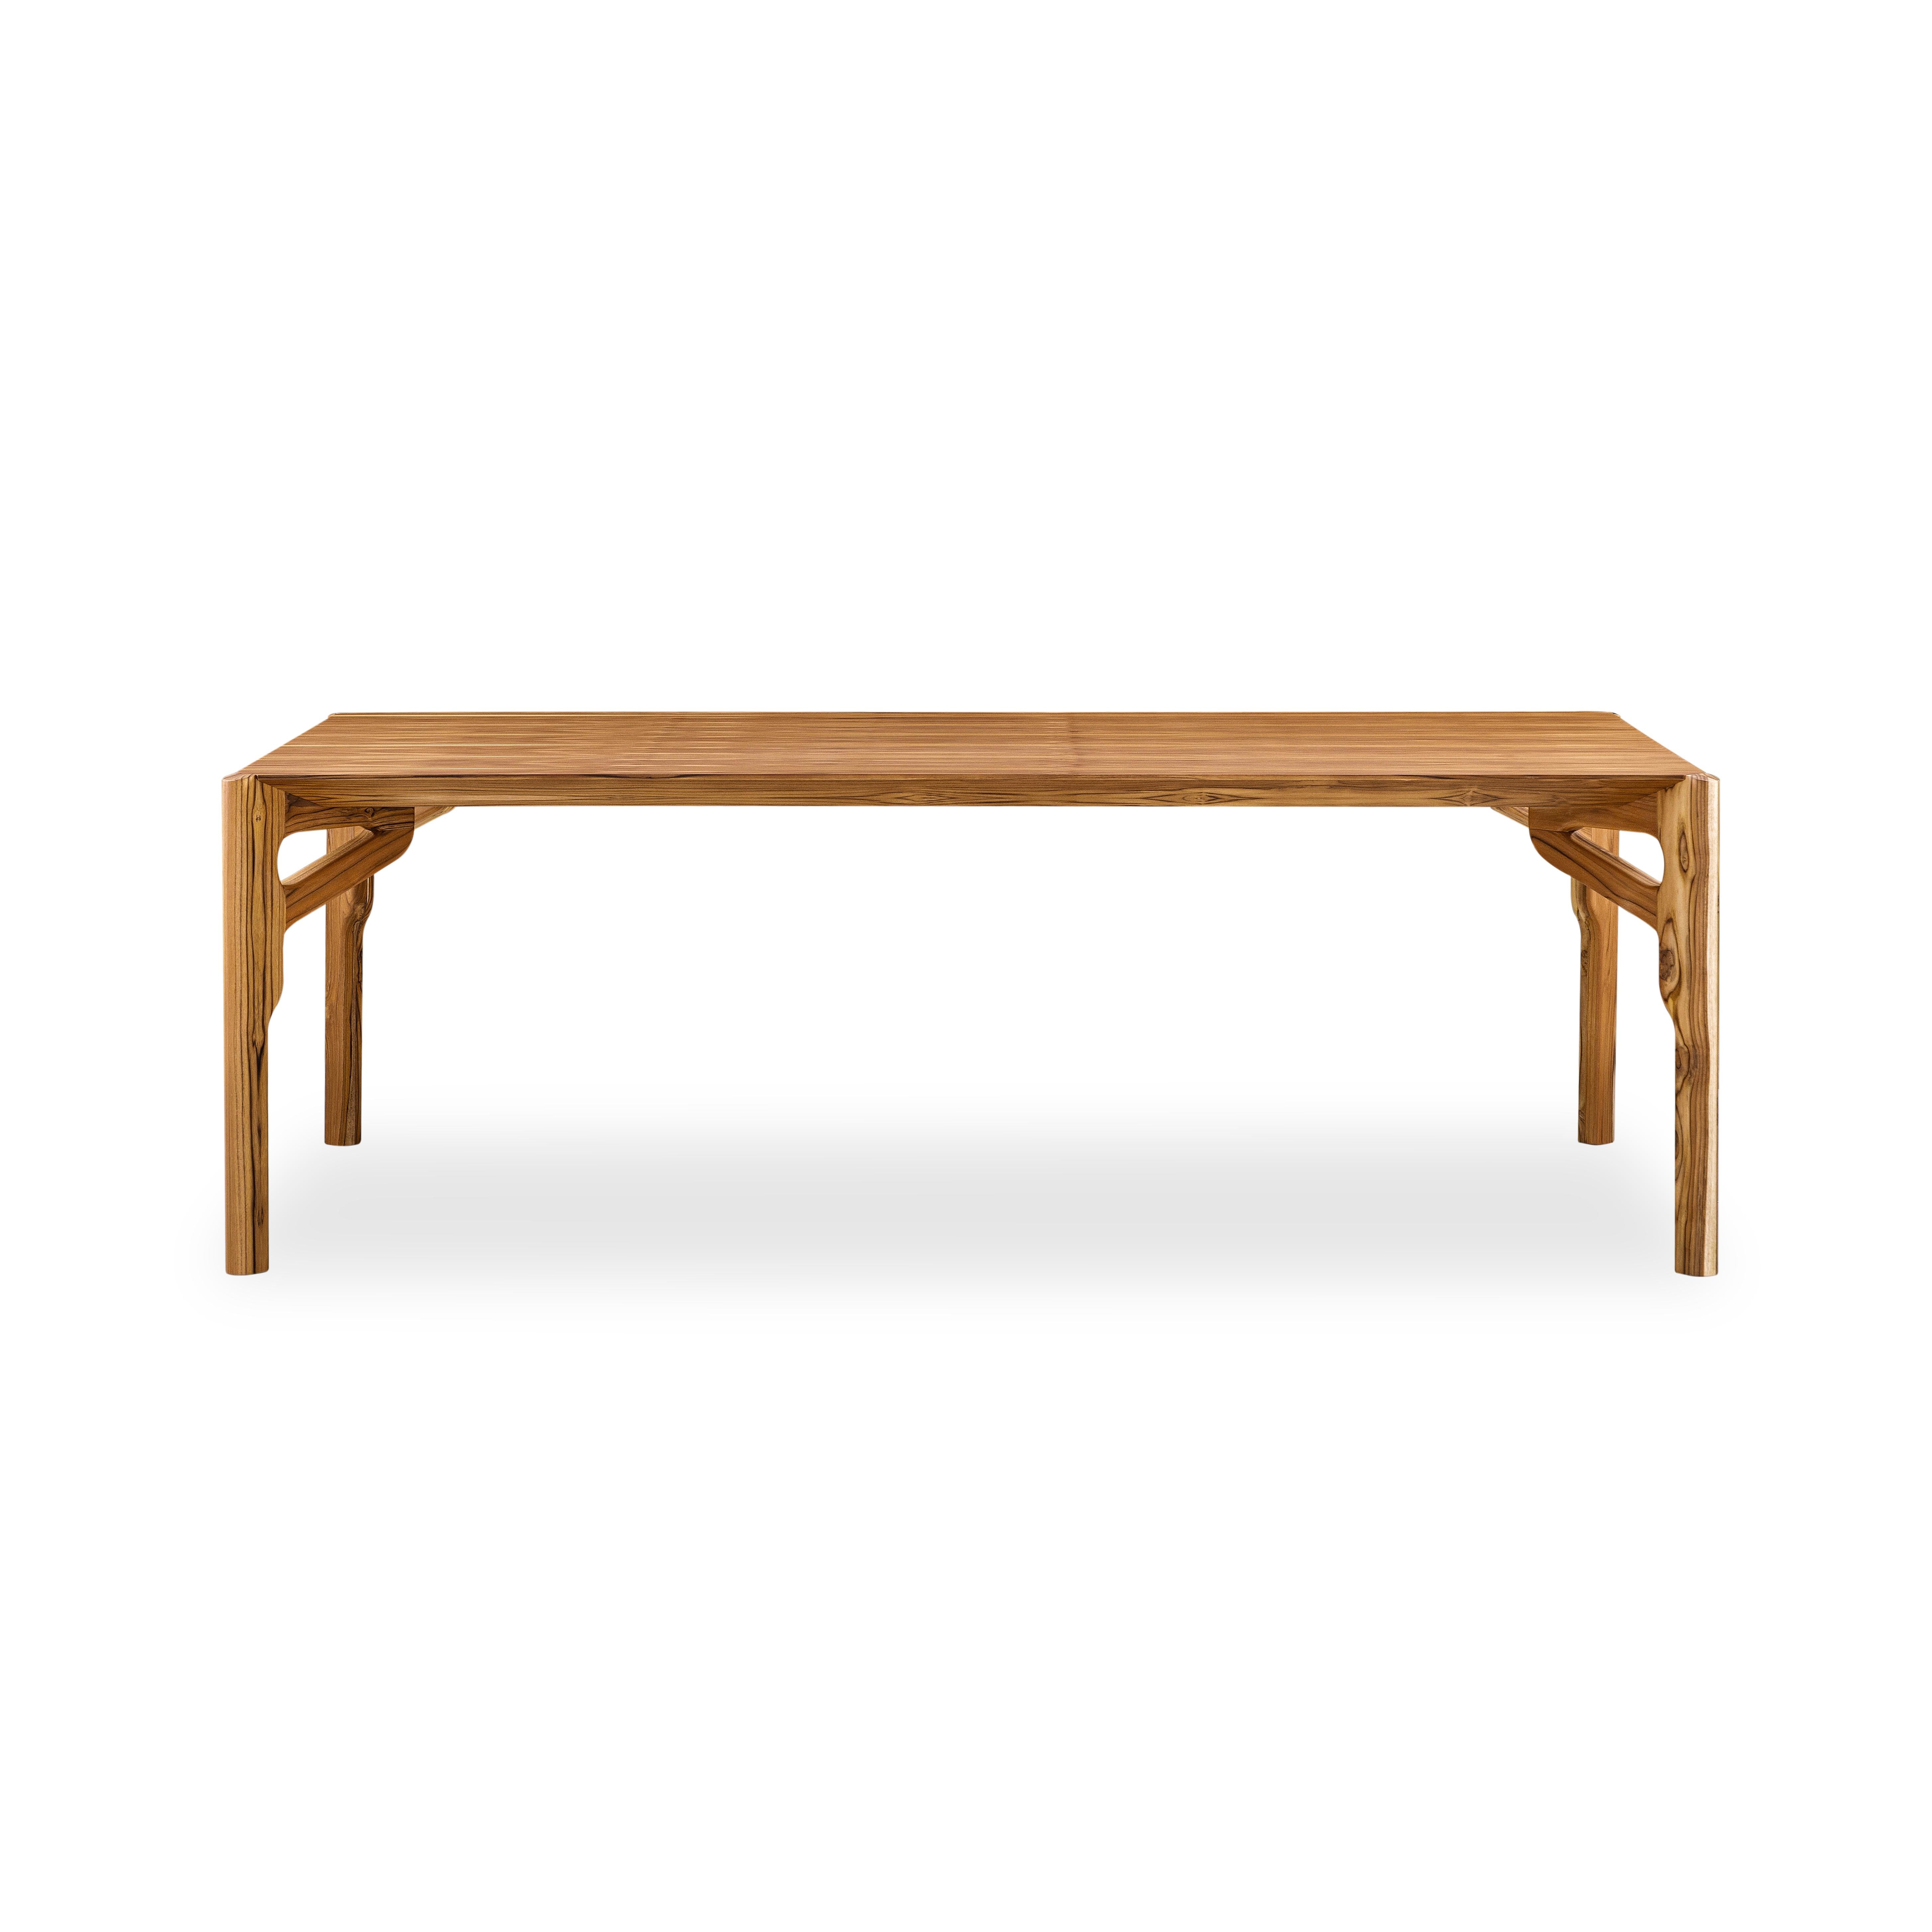 Hawk Dining Table with a Teak Wood Veneered Table Top 86'' For Sale 2